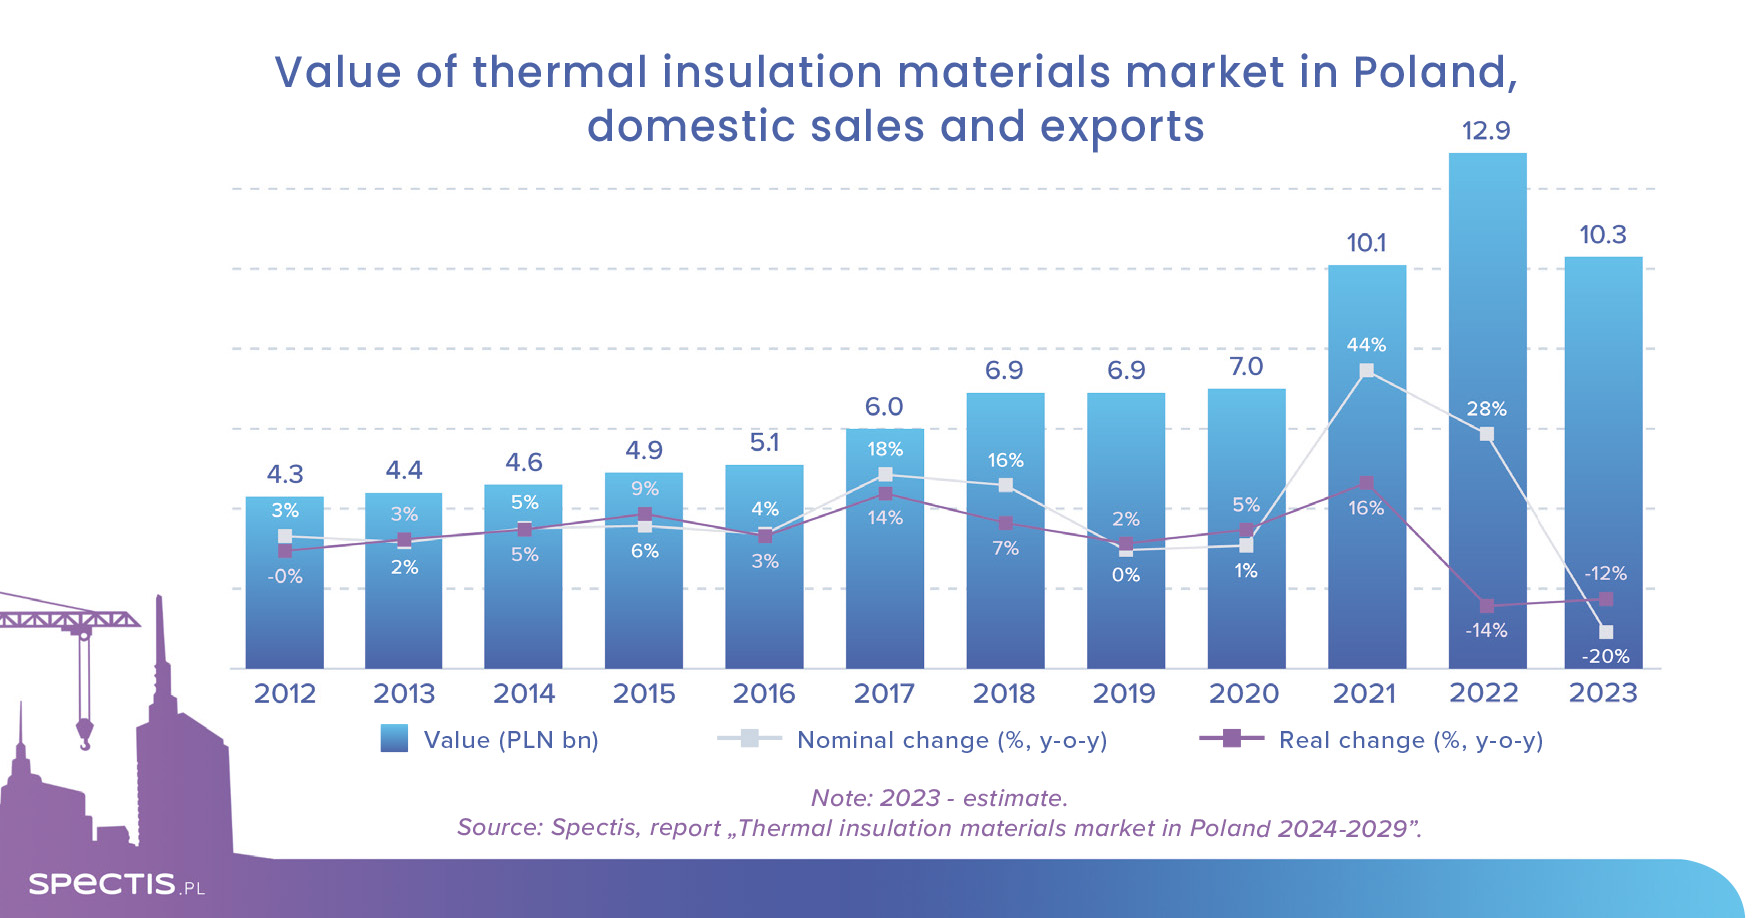 Thermal insulation materials market in Poland worth over PLN 10bn